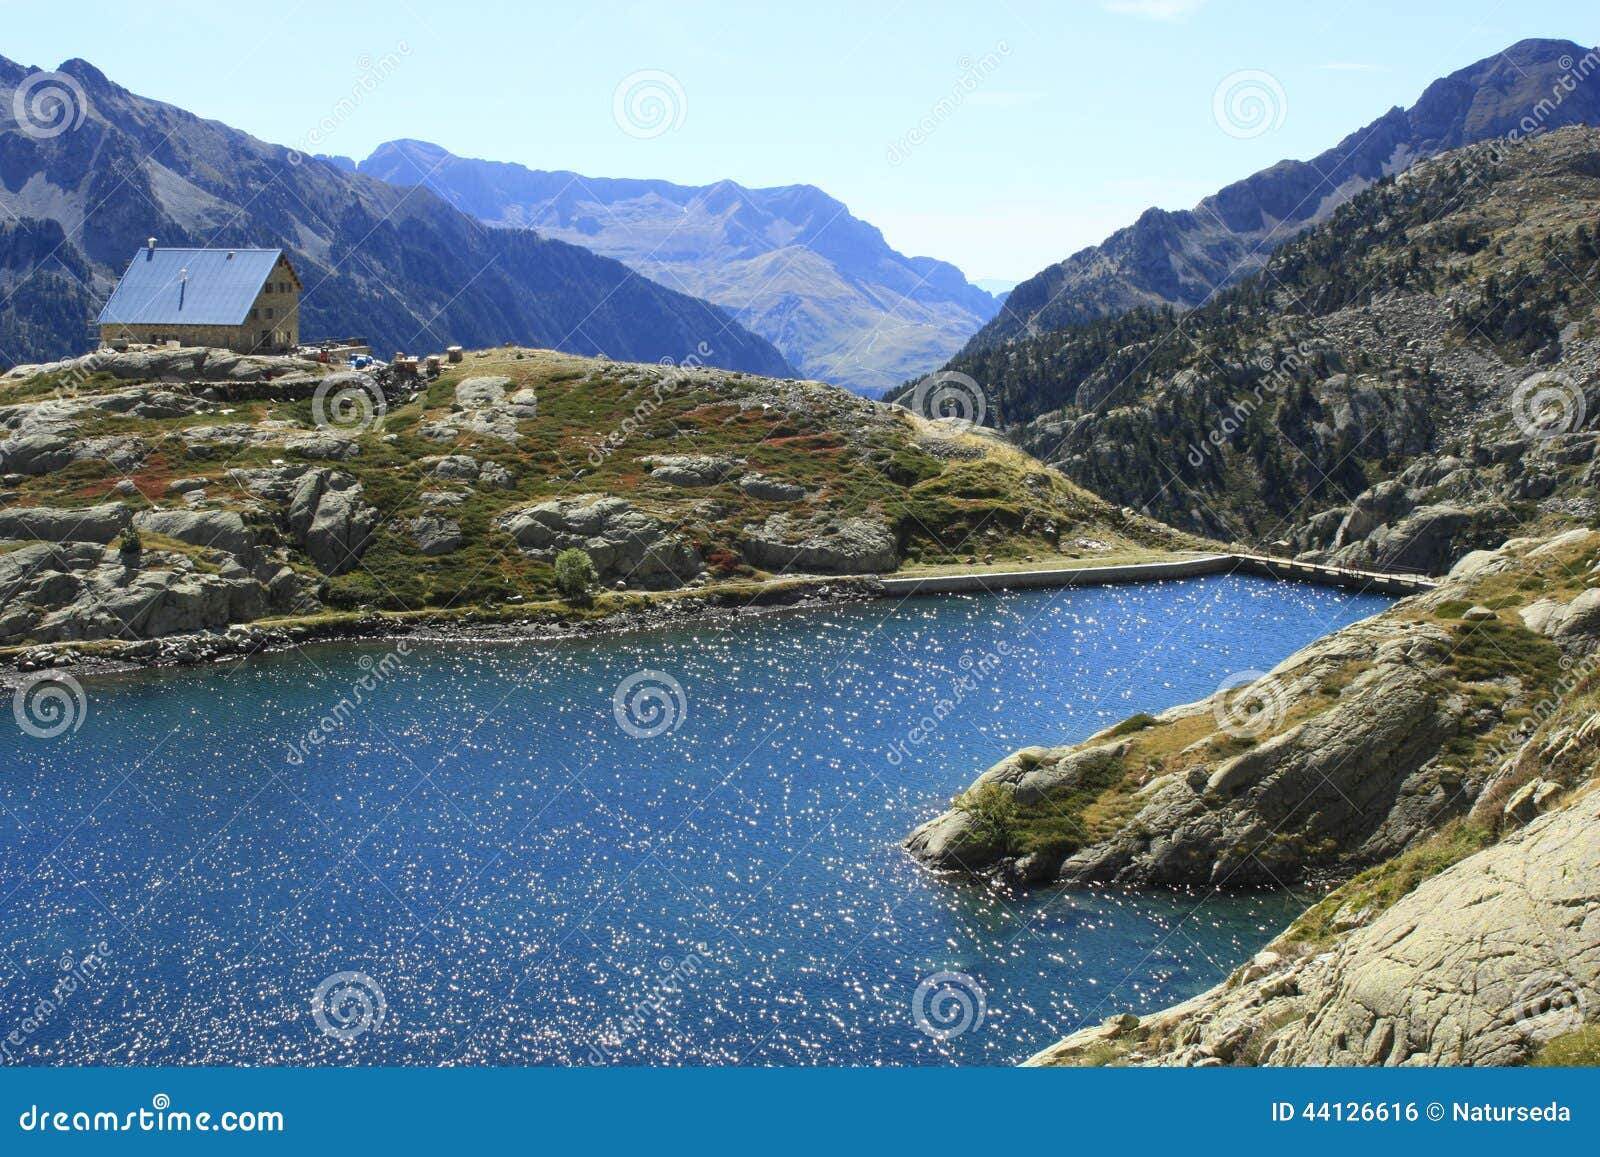 waterfull in mountains in tena valley, pyrenees. panticosa